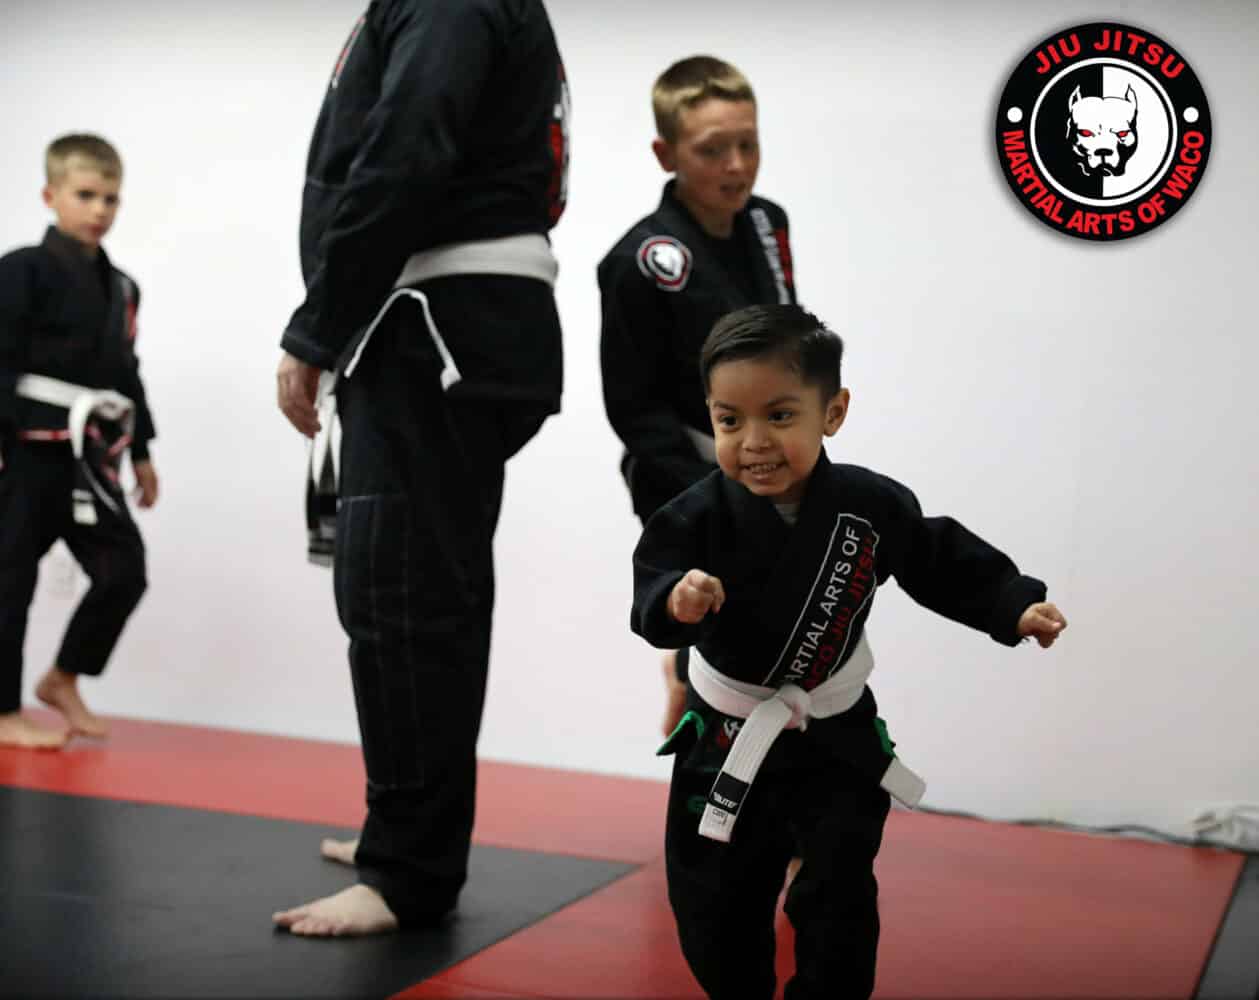 4 year olds warming up in kids class gi bjj